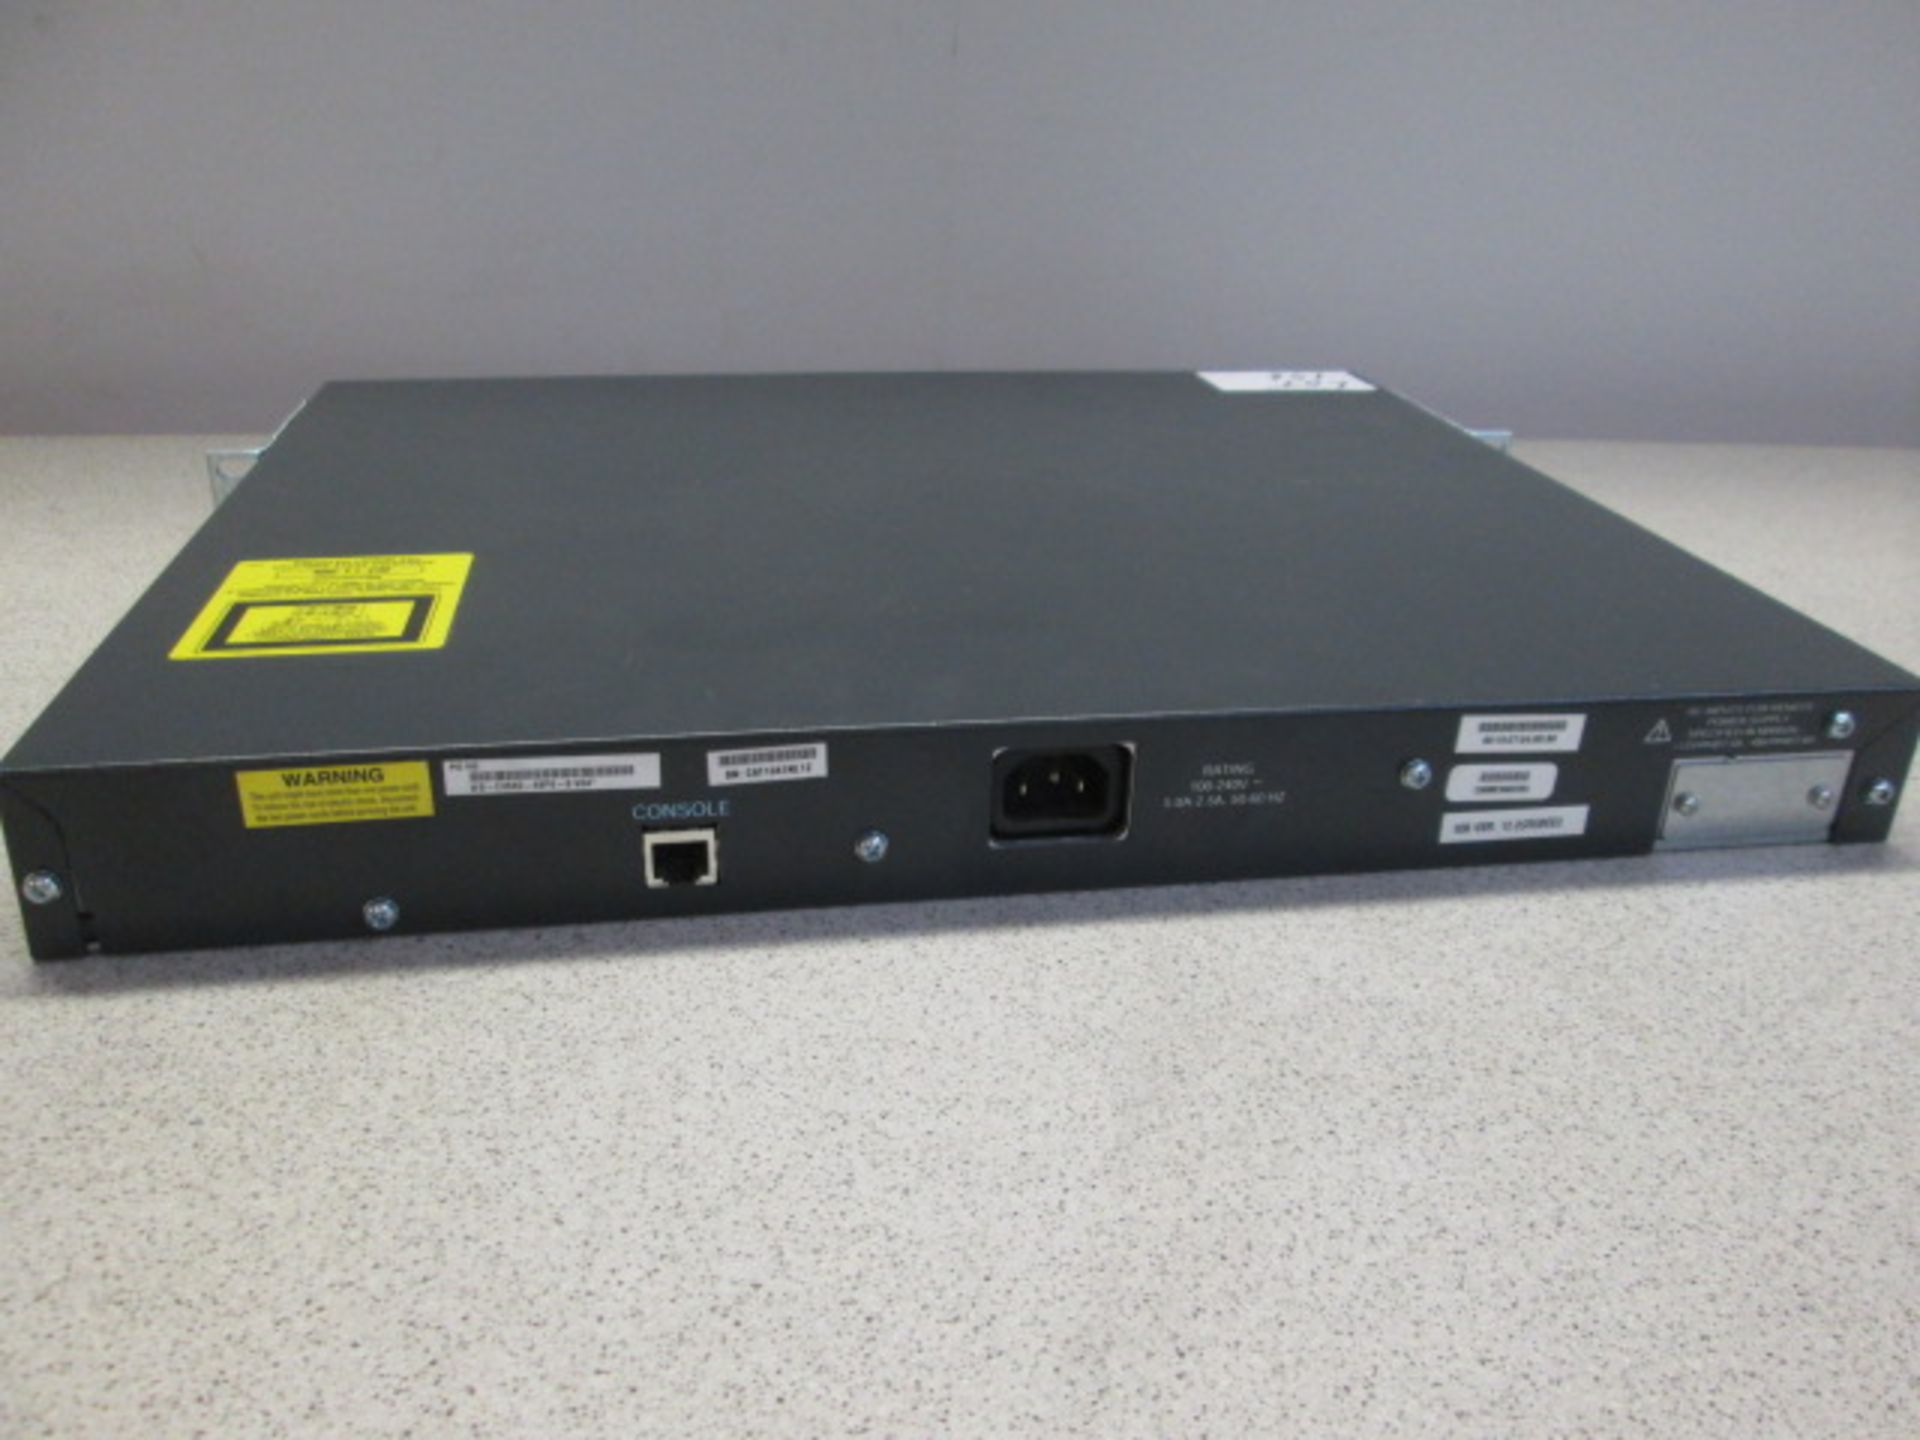 Cisco System 48 Port Switch, Model Catalyst 3560. Comes with Power Supply